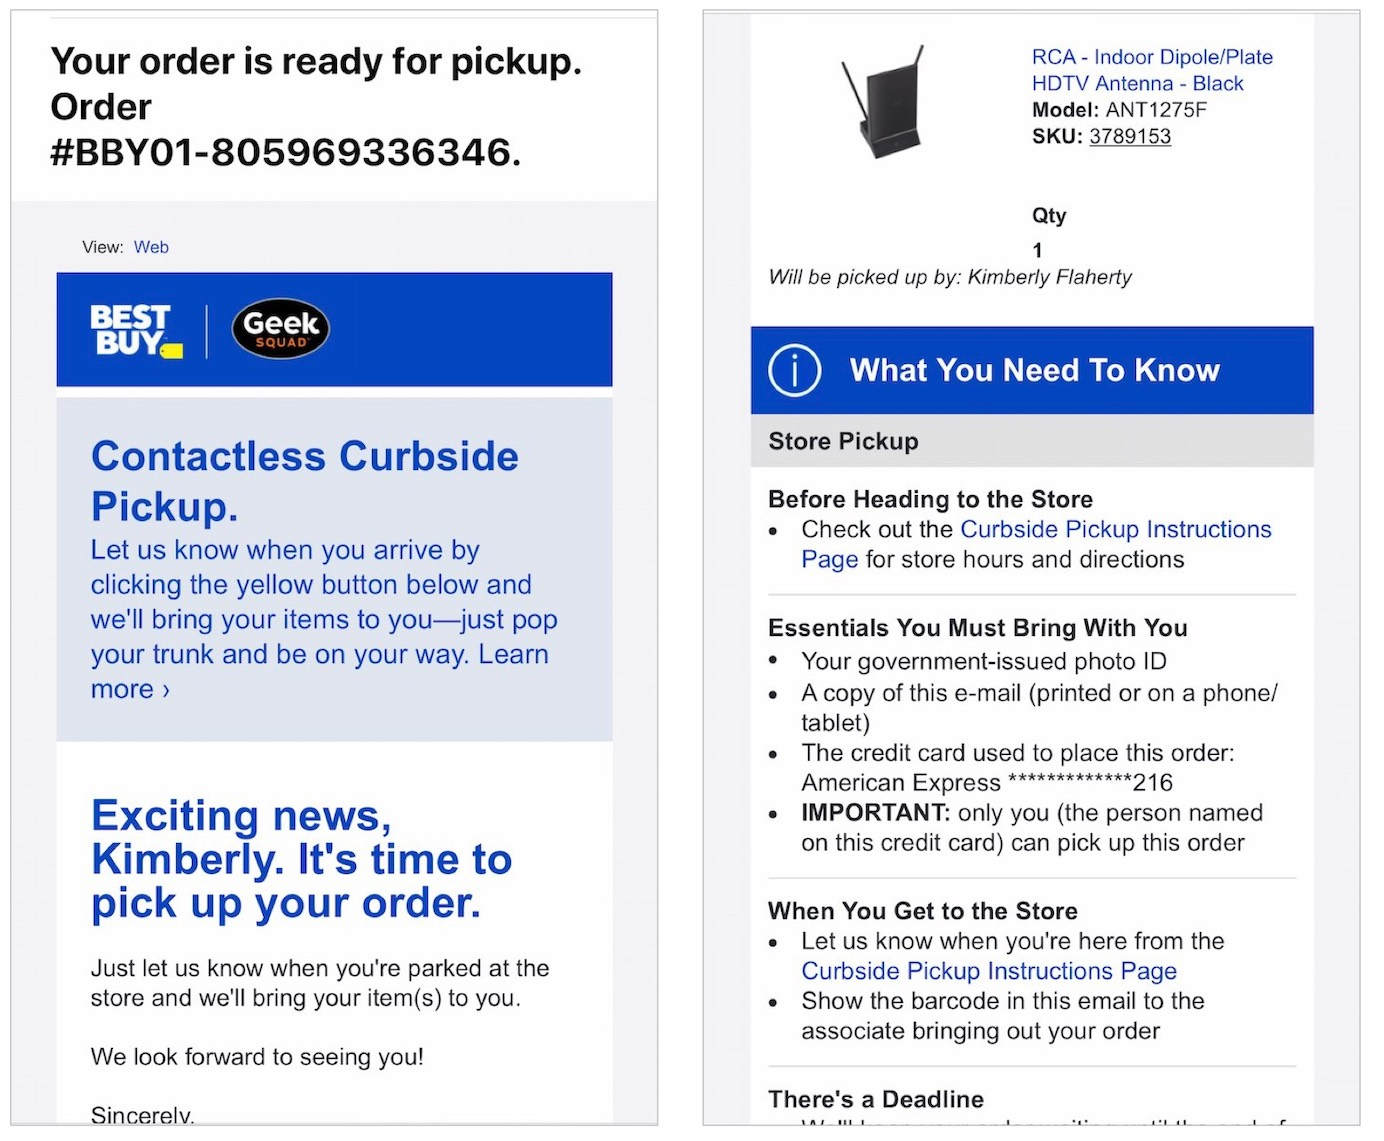 Order pickup notification from Best Buy.